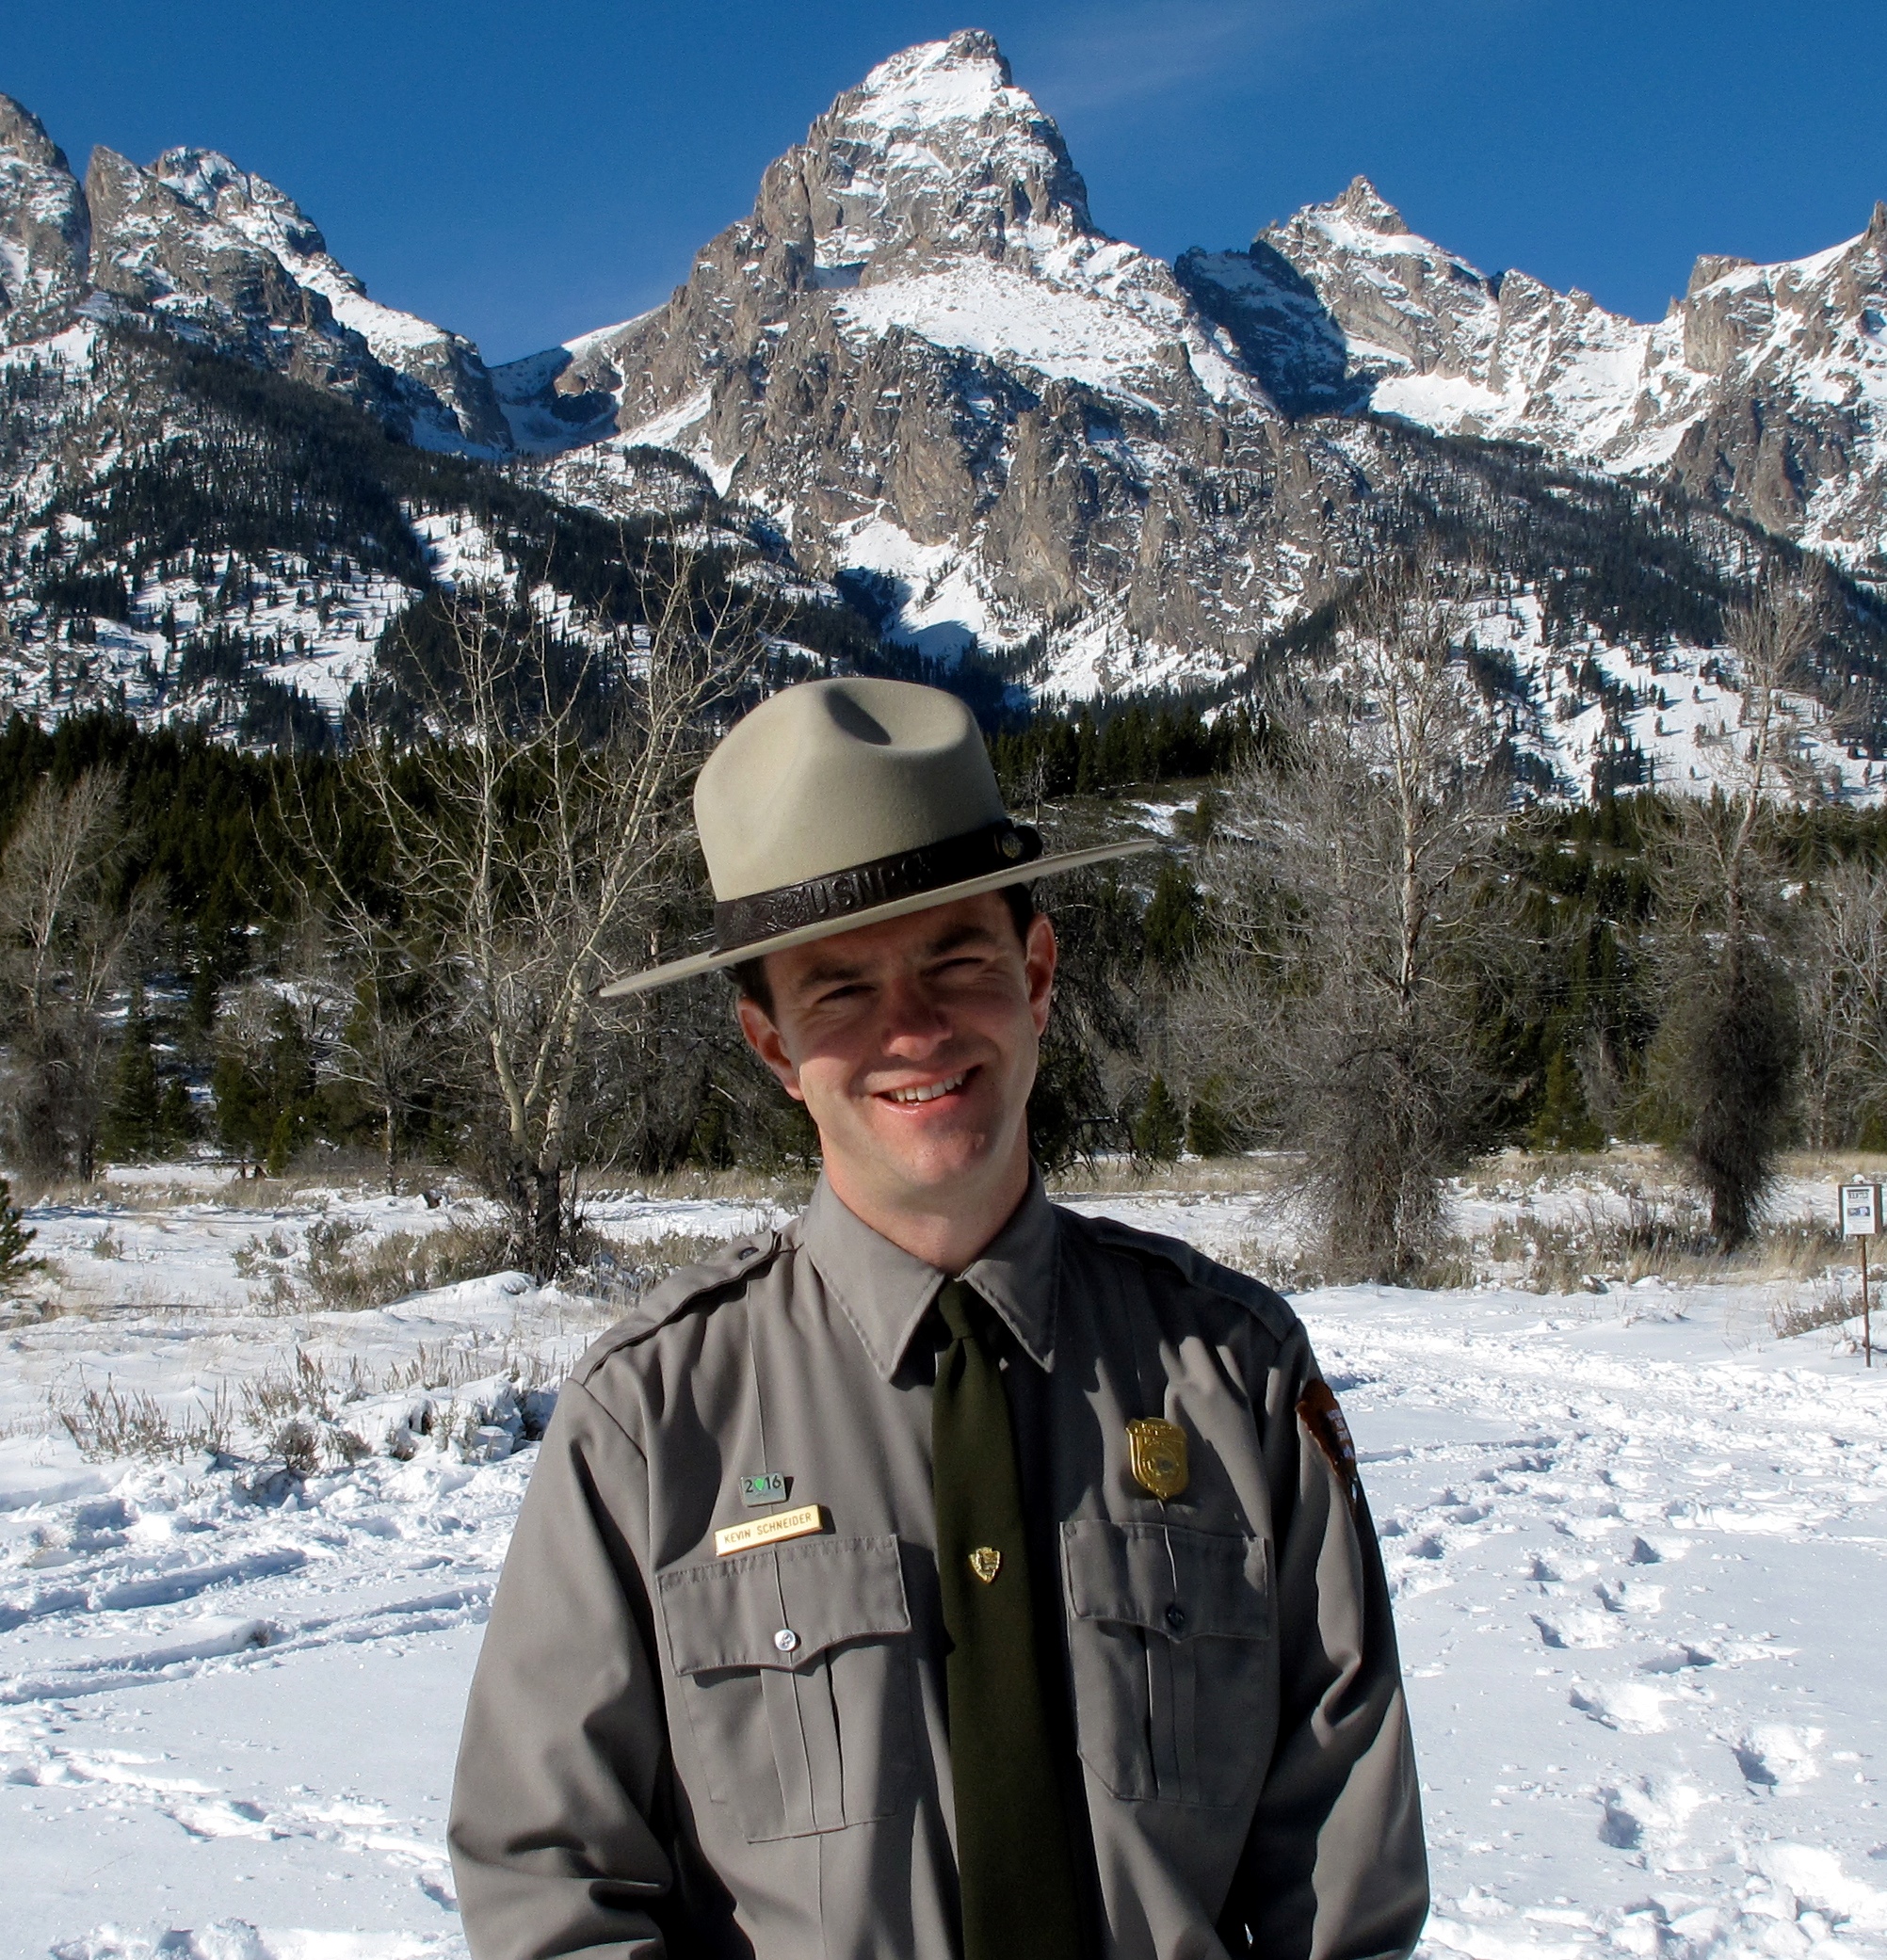 A man wearing a ranger uniform standing in front of snow covered rocky mountain peaks.